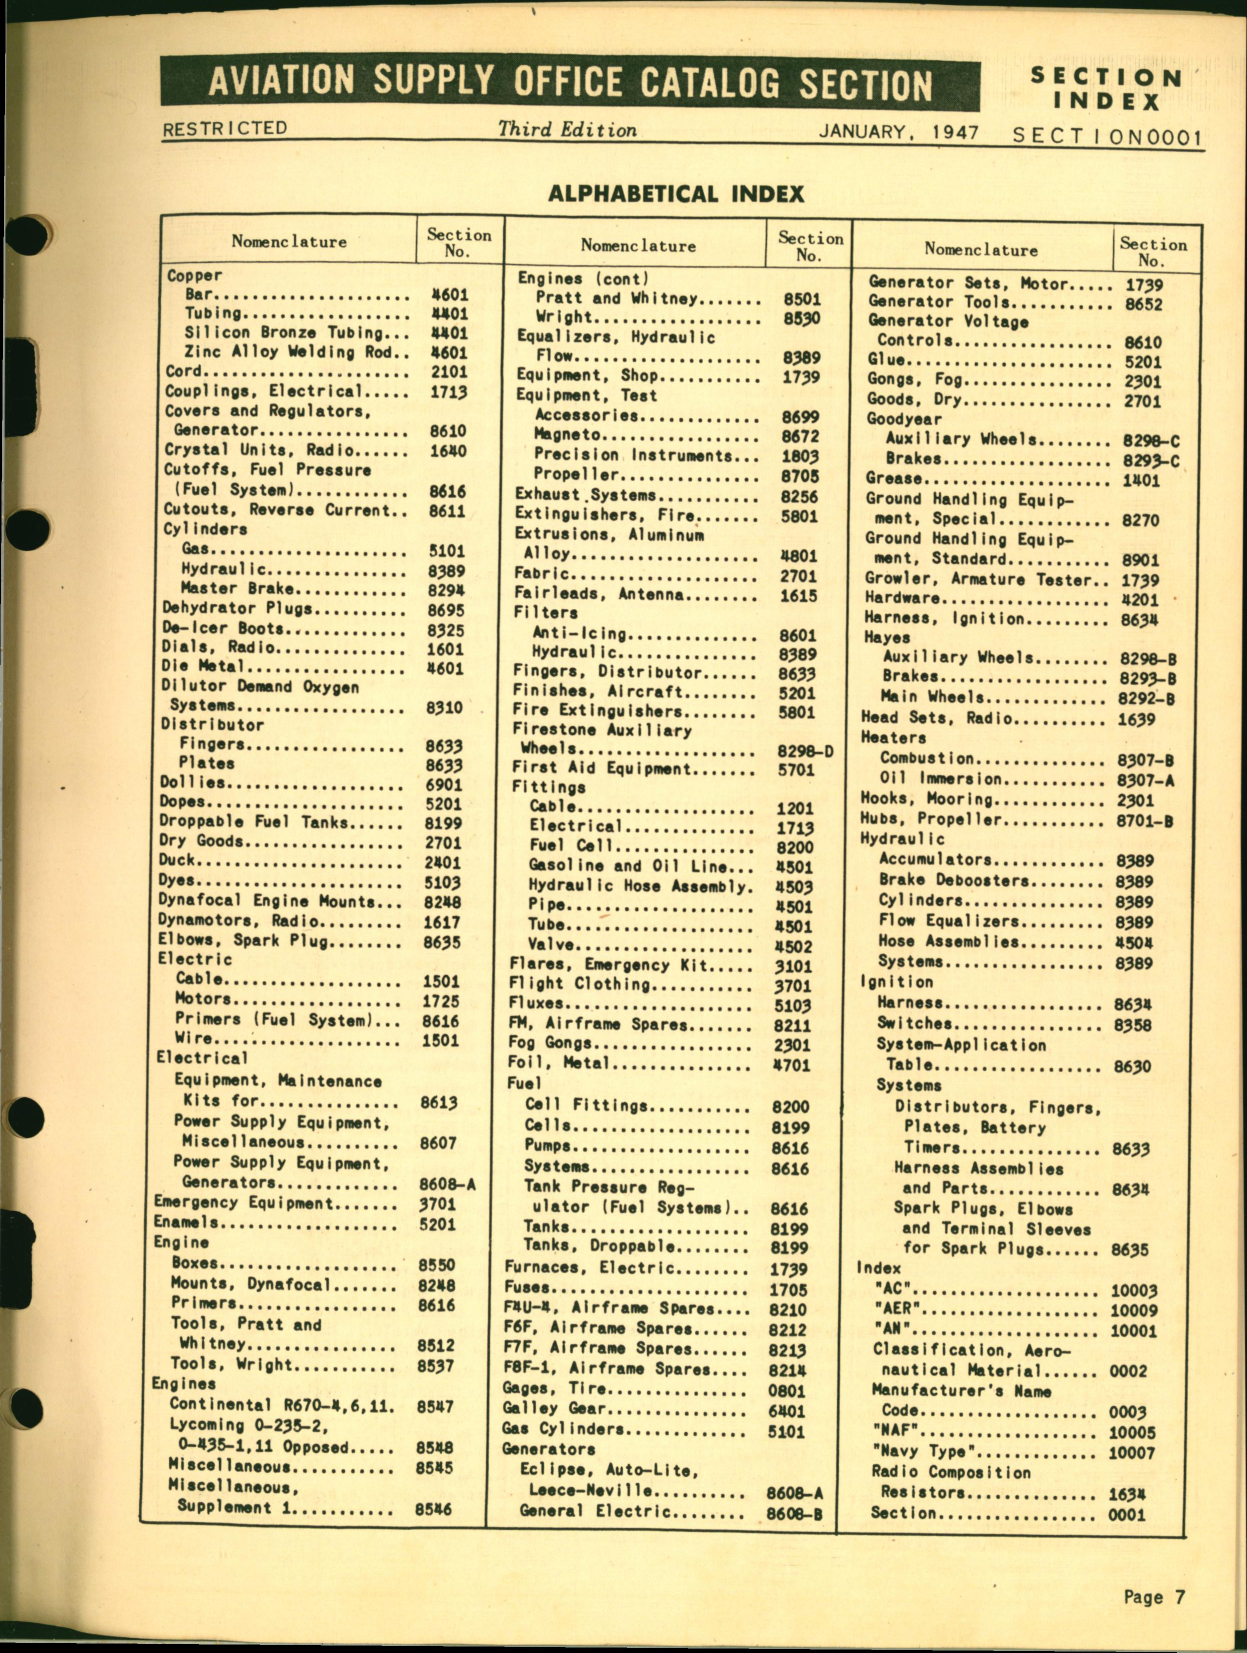 Sample page 7 from AirCorps Library document: Section Index